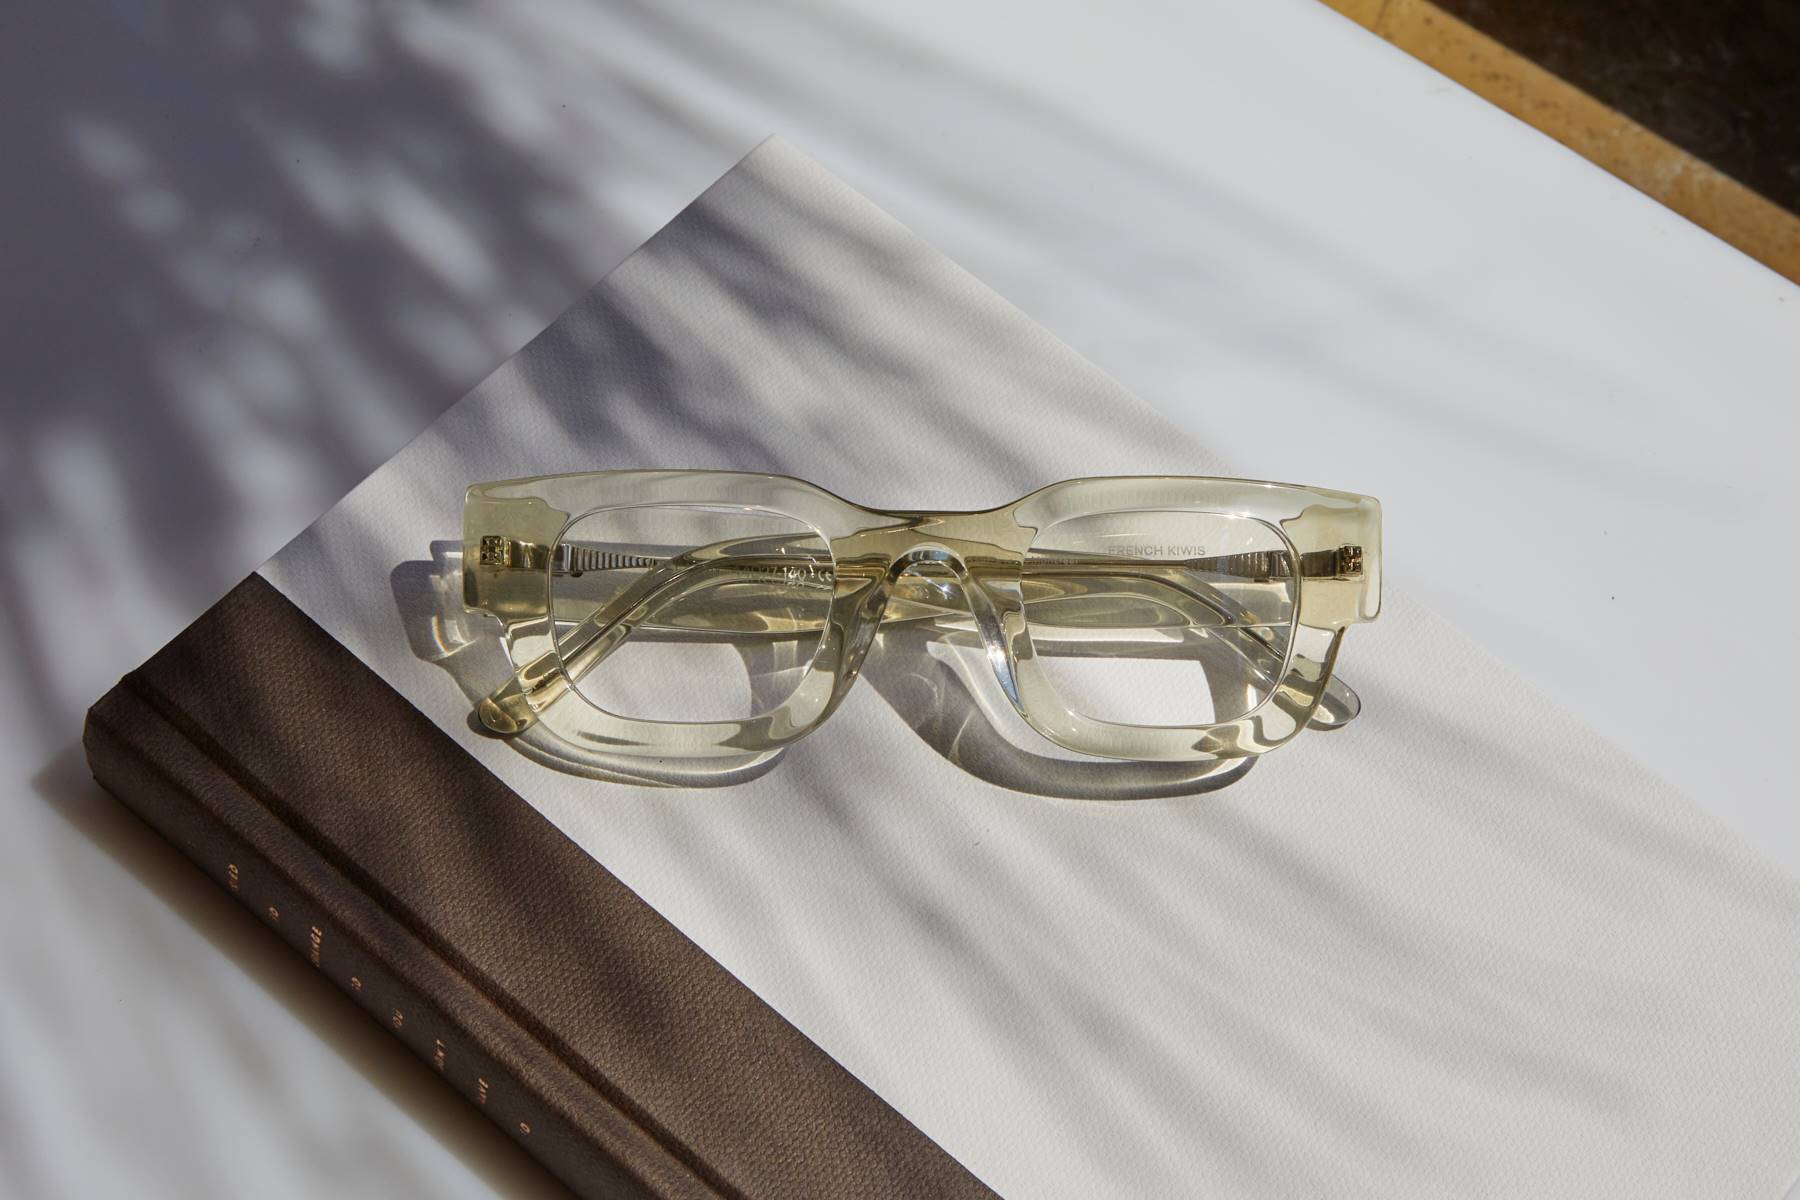 Photo Details of Valentin Cobalt Reading Glasses in a room